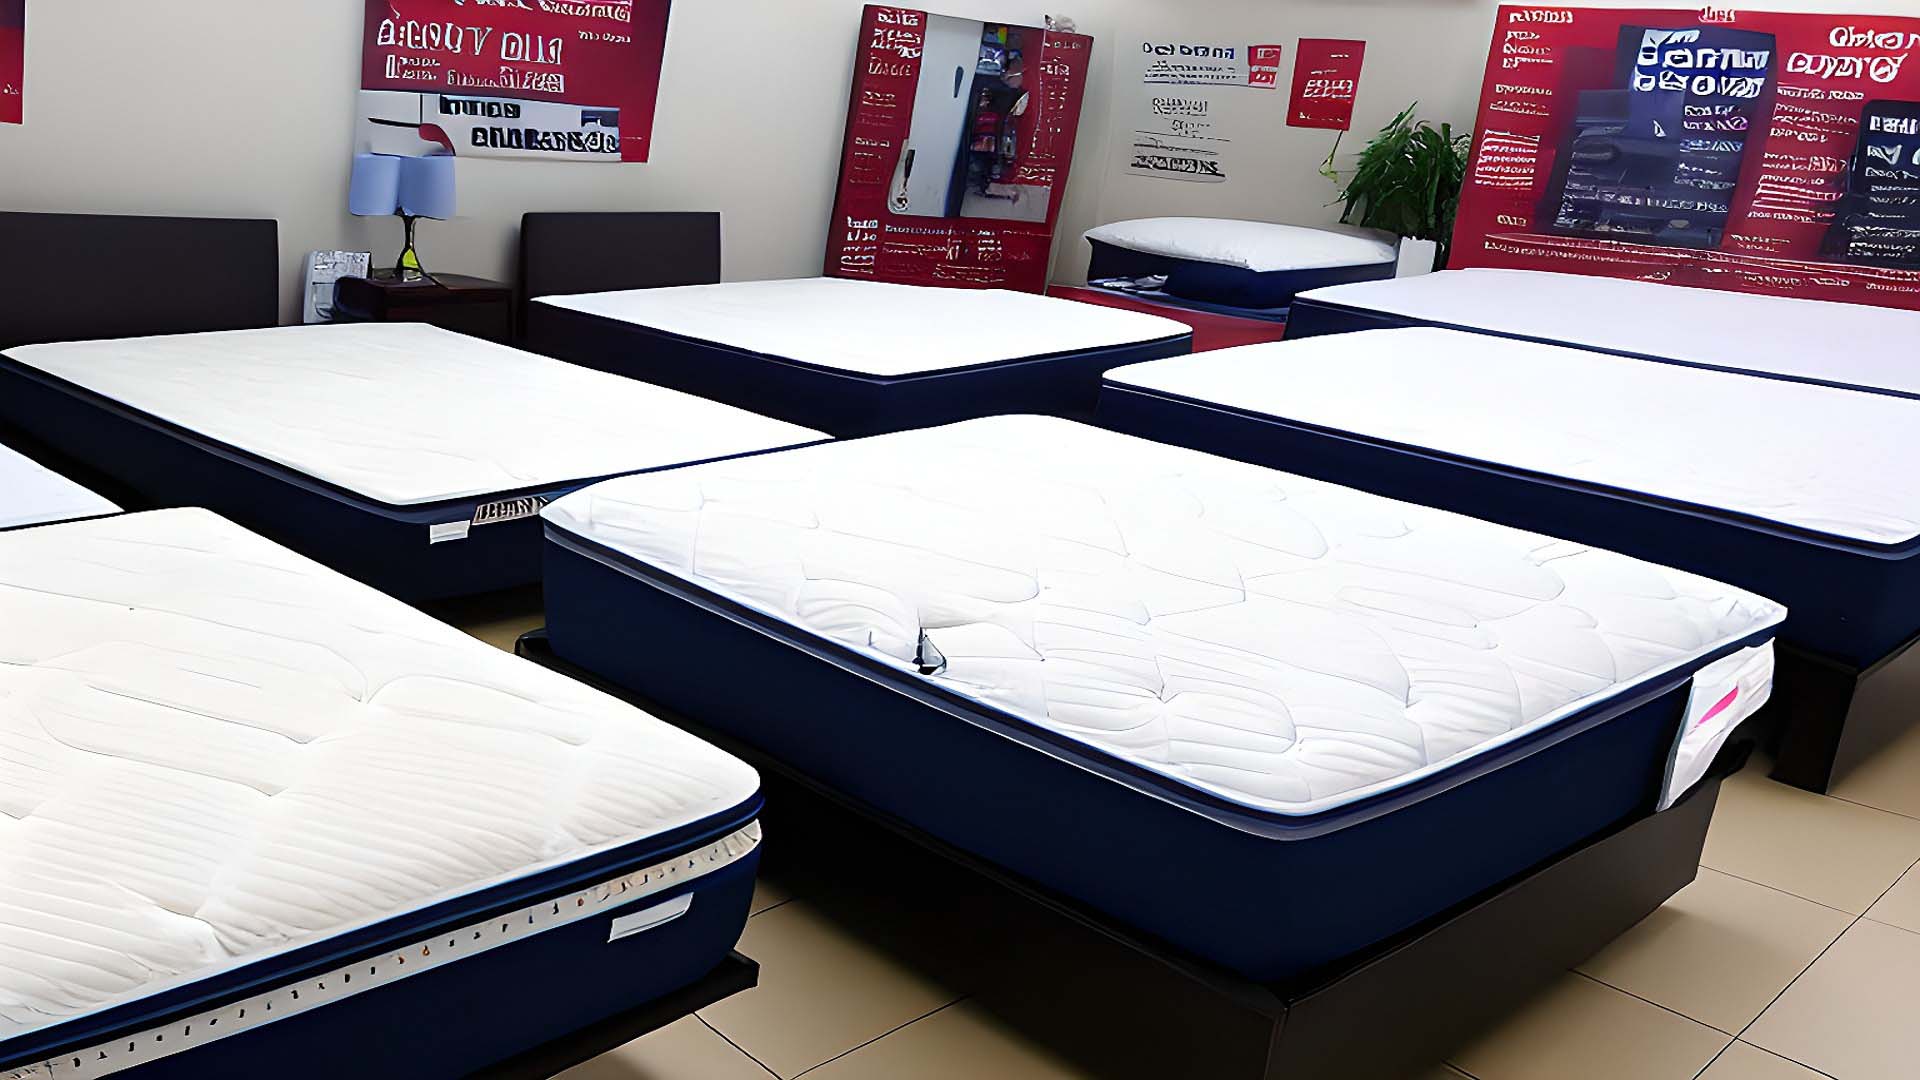 Mattress By Appointment in Madera, California 93636